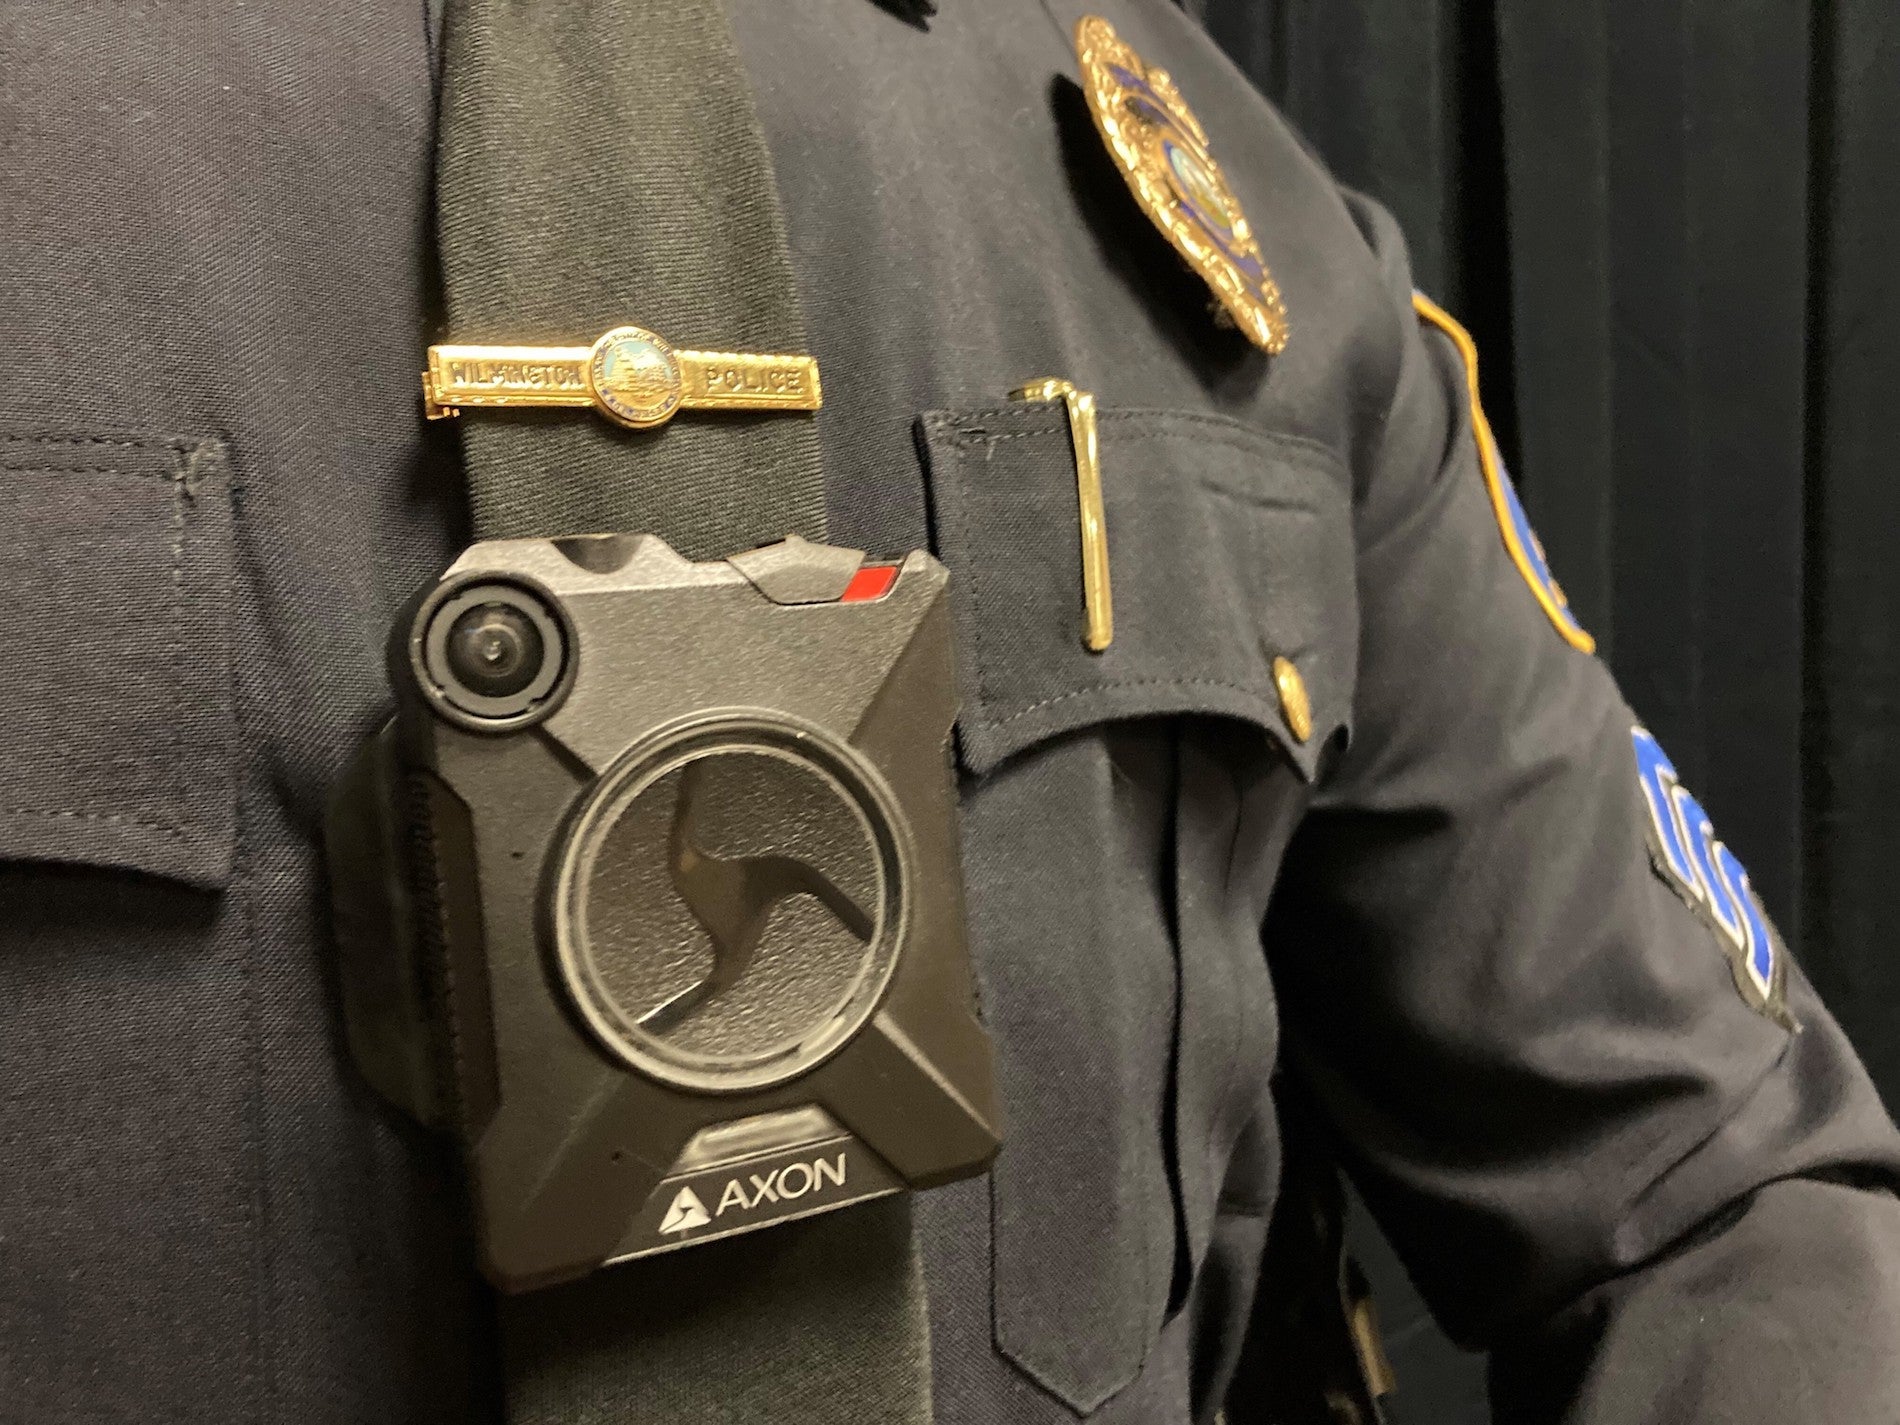 Body cameras are seen as key to police reform. But do they increase  accountability?